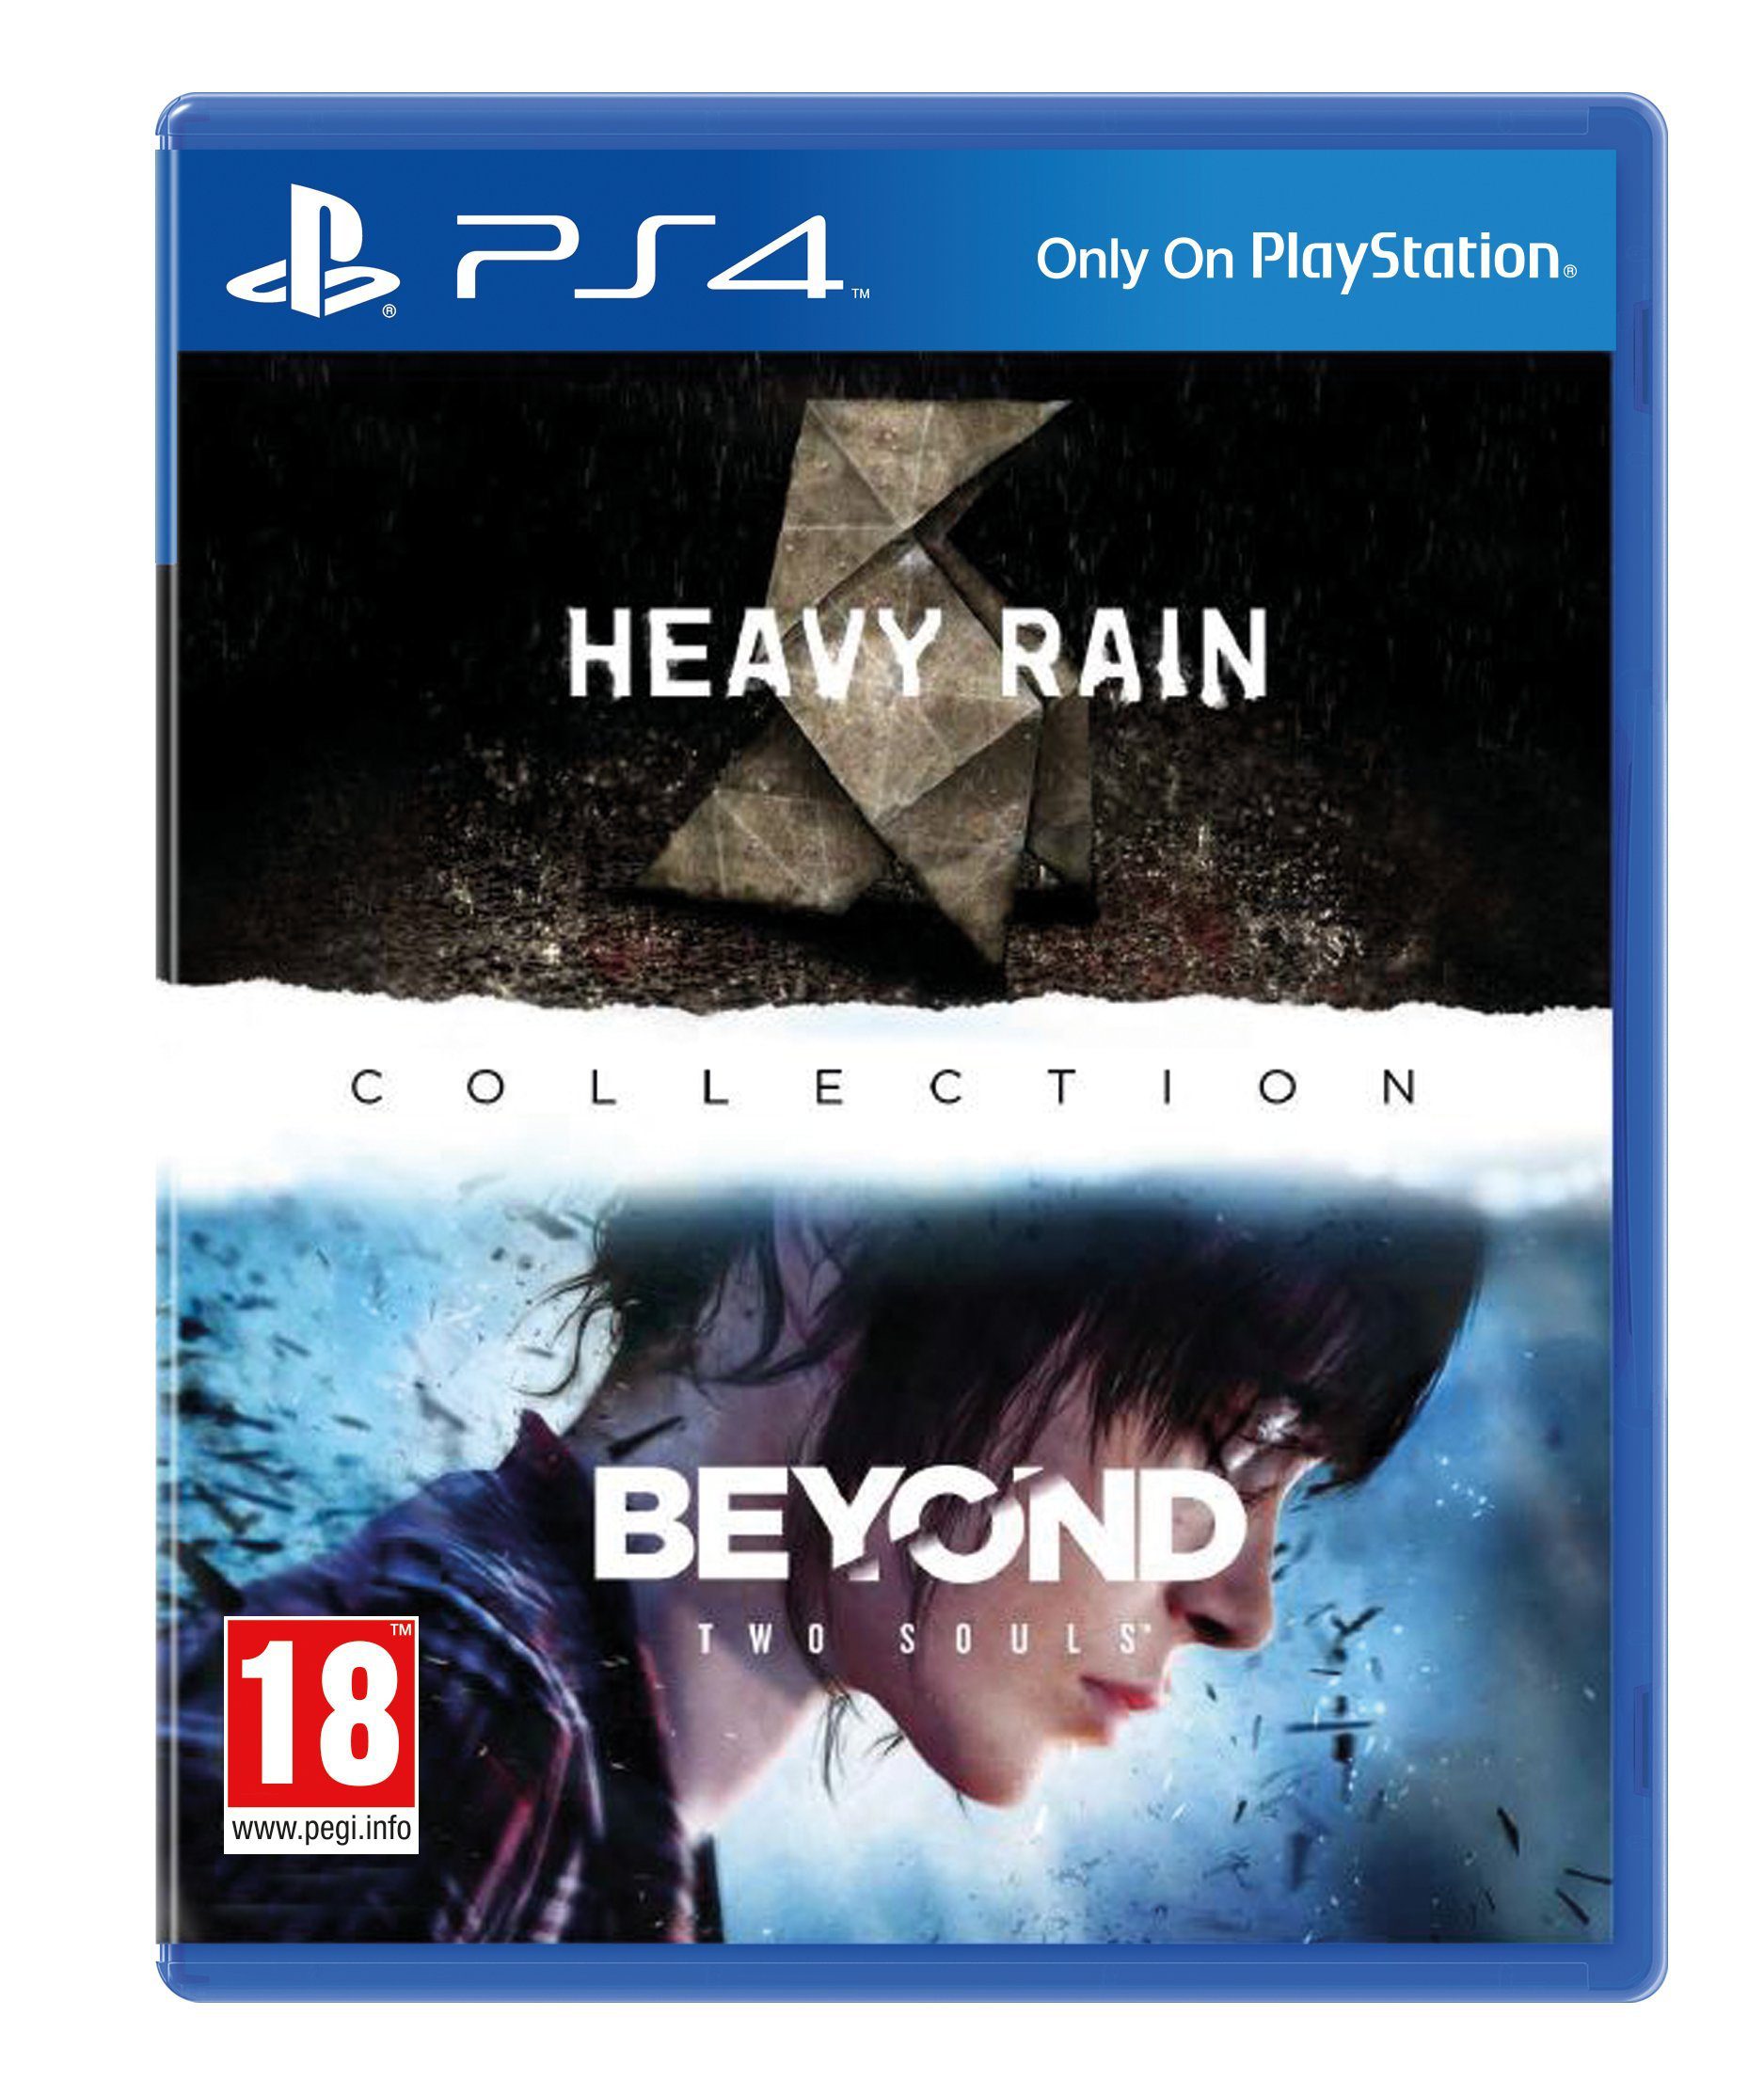 Heavy Rain and Beyond Two Souls PS4